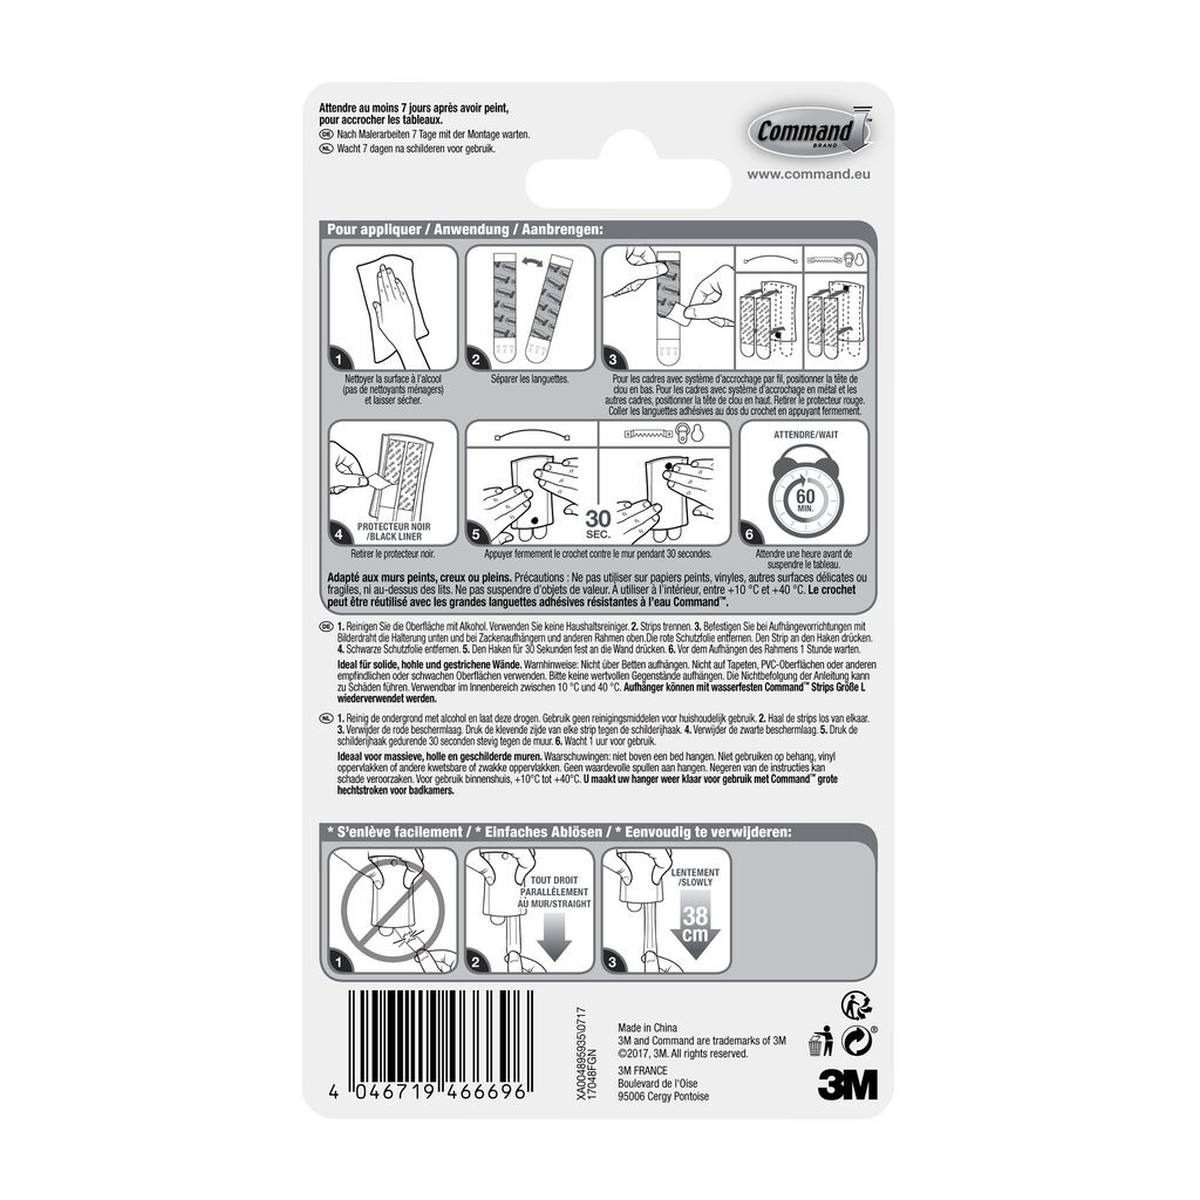 3M Command picture nail L, 1 plastic hook + 2 white Command Strips in size L, up to 2.3 kg load capacity